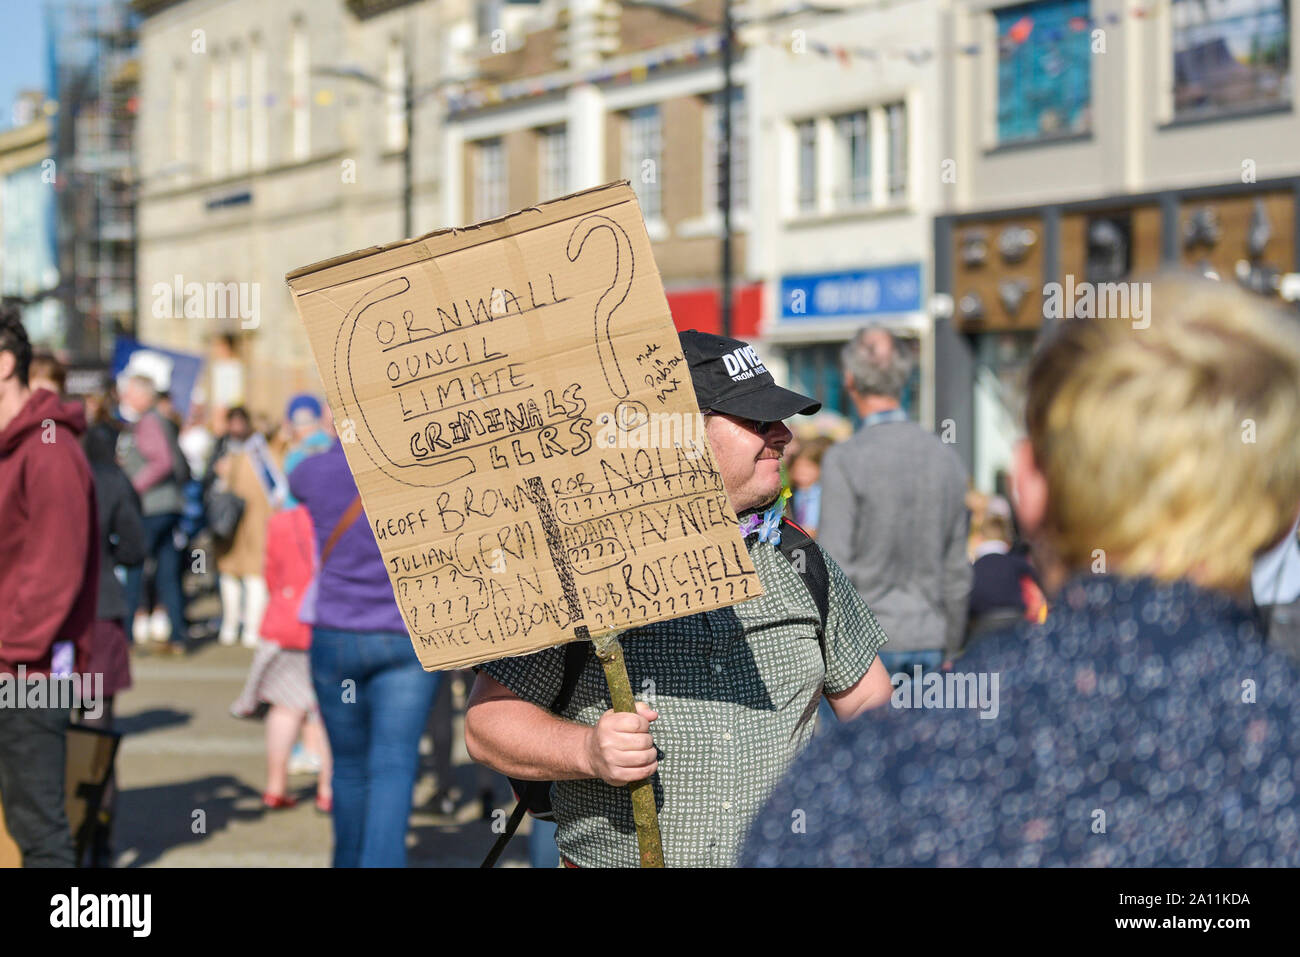 A crude hand written placard carried by a protester participating in the Extinction Rebellion climate strike in Truro City City in Cornwall. Stock Photo